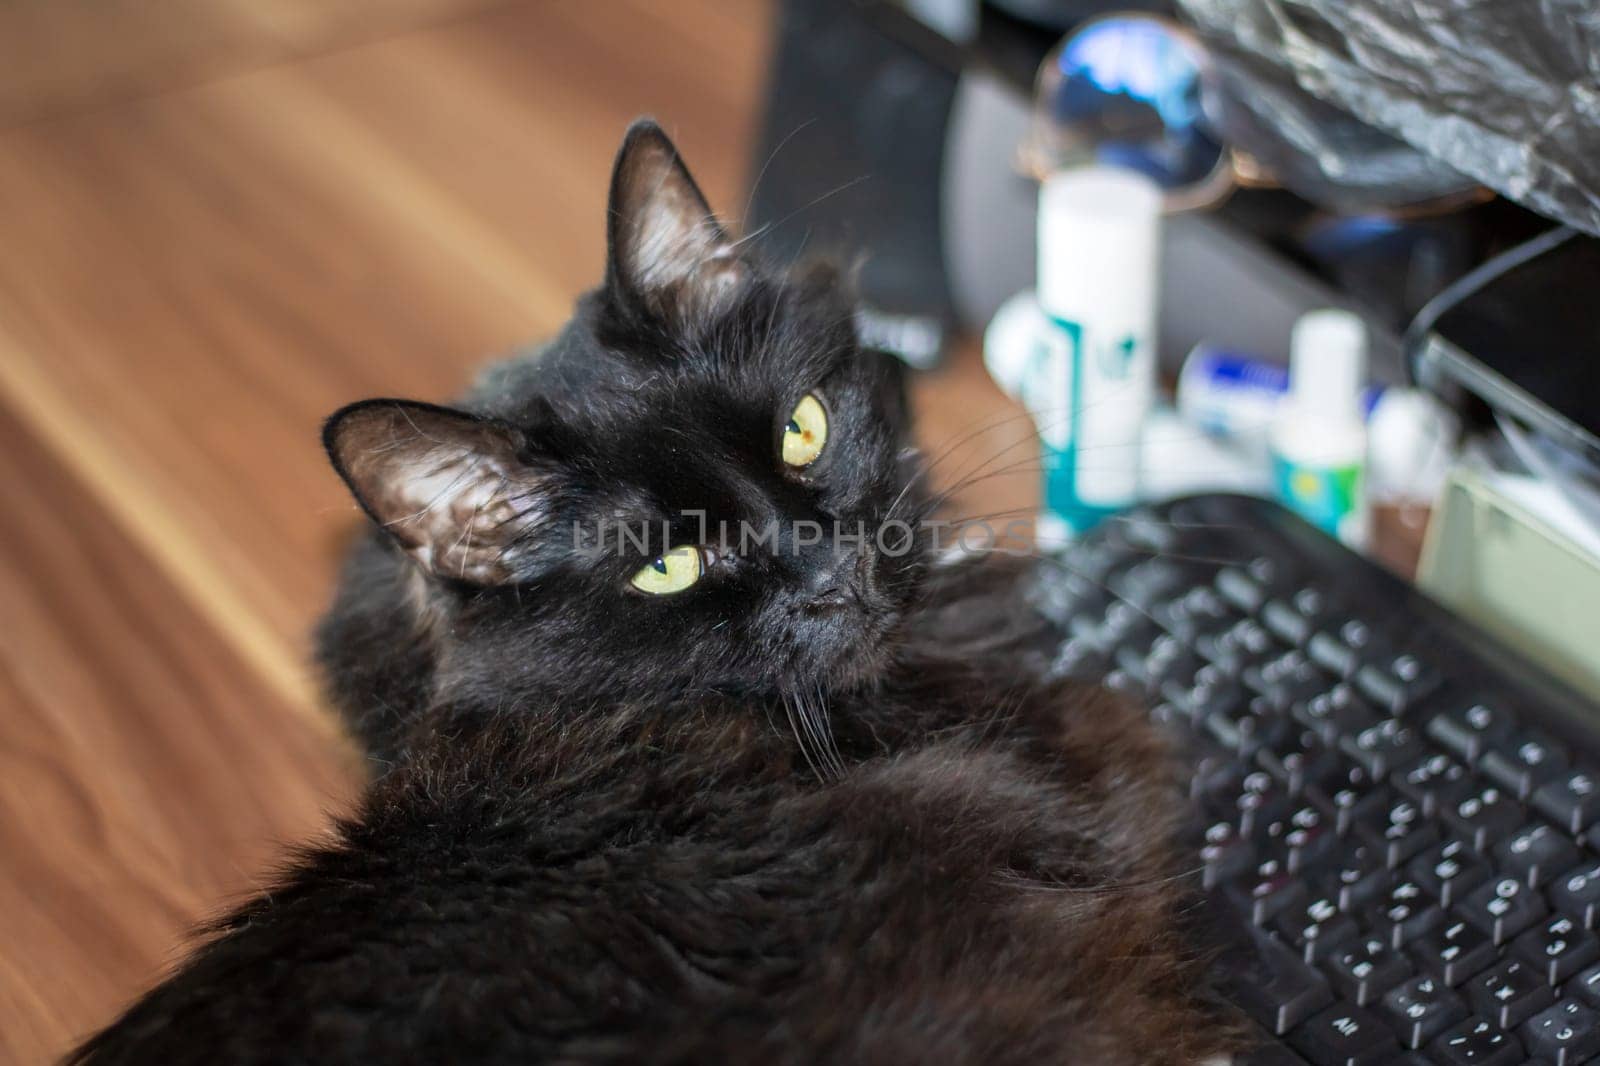 Black impudent cat lying on the keyboard by Vera1703